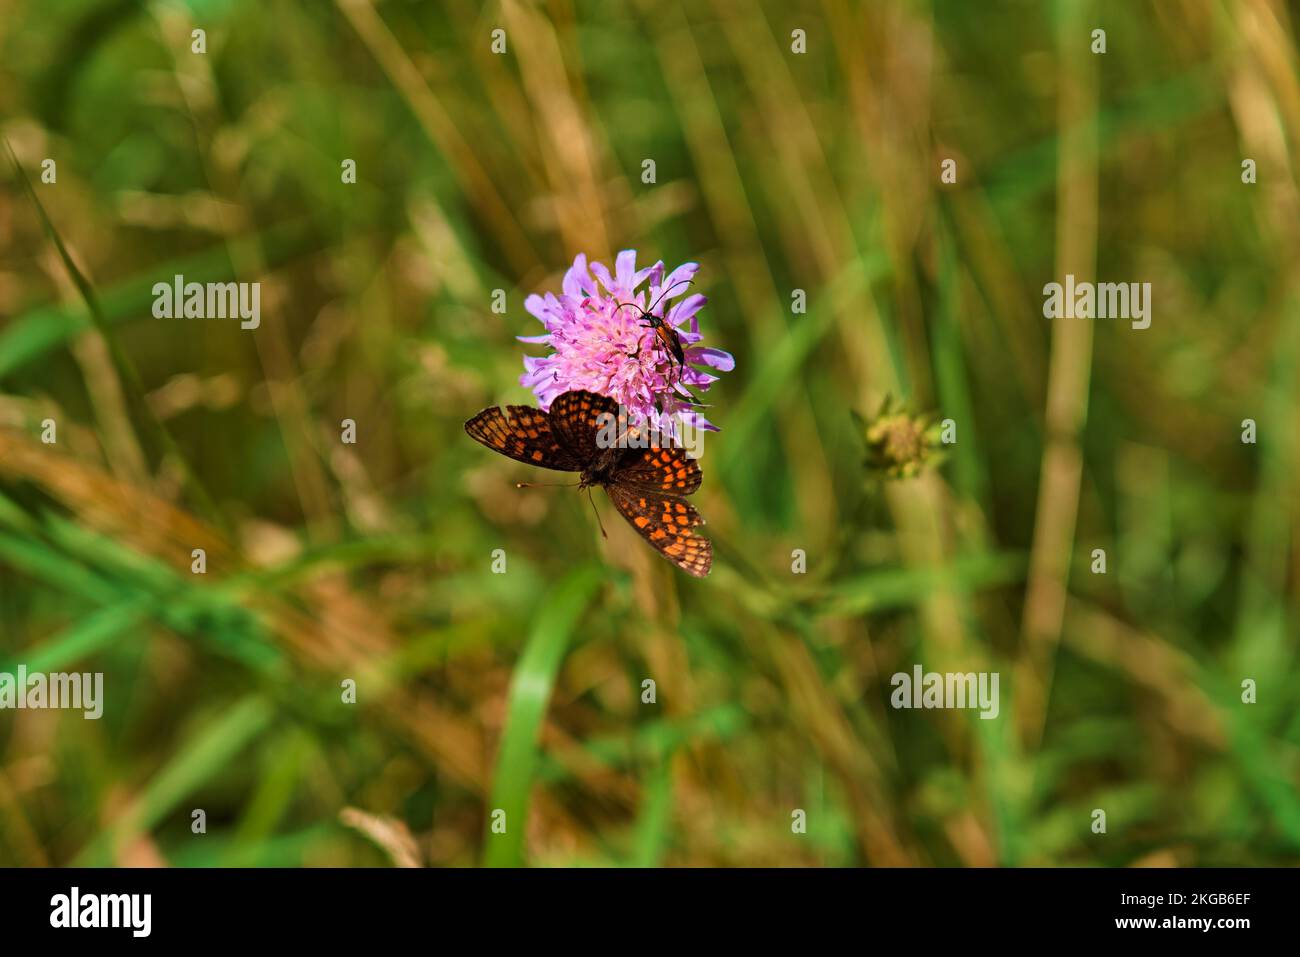 A close-up of an Atalia checker (Melitaea athalia) butterfly and a bug resting on a wildflower Stock Photo